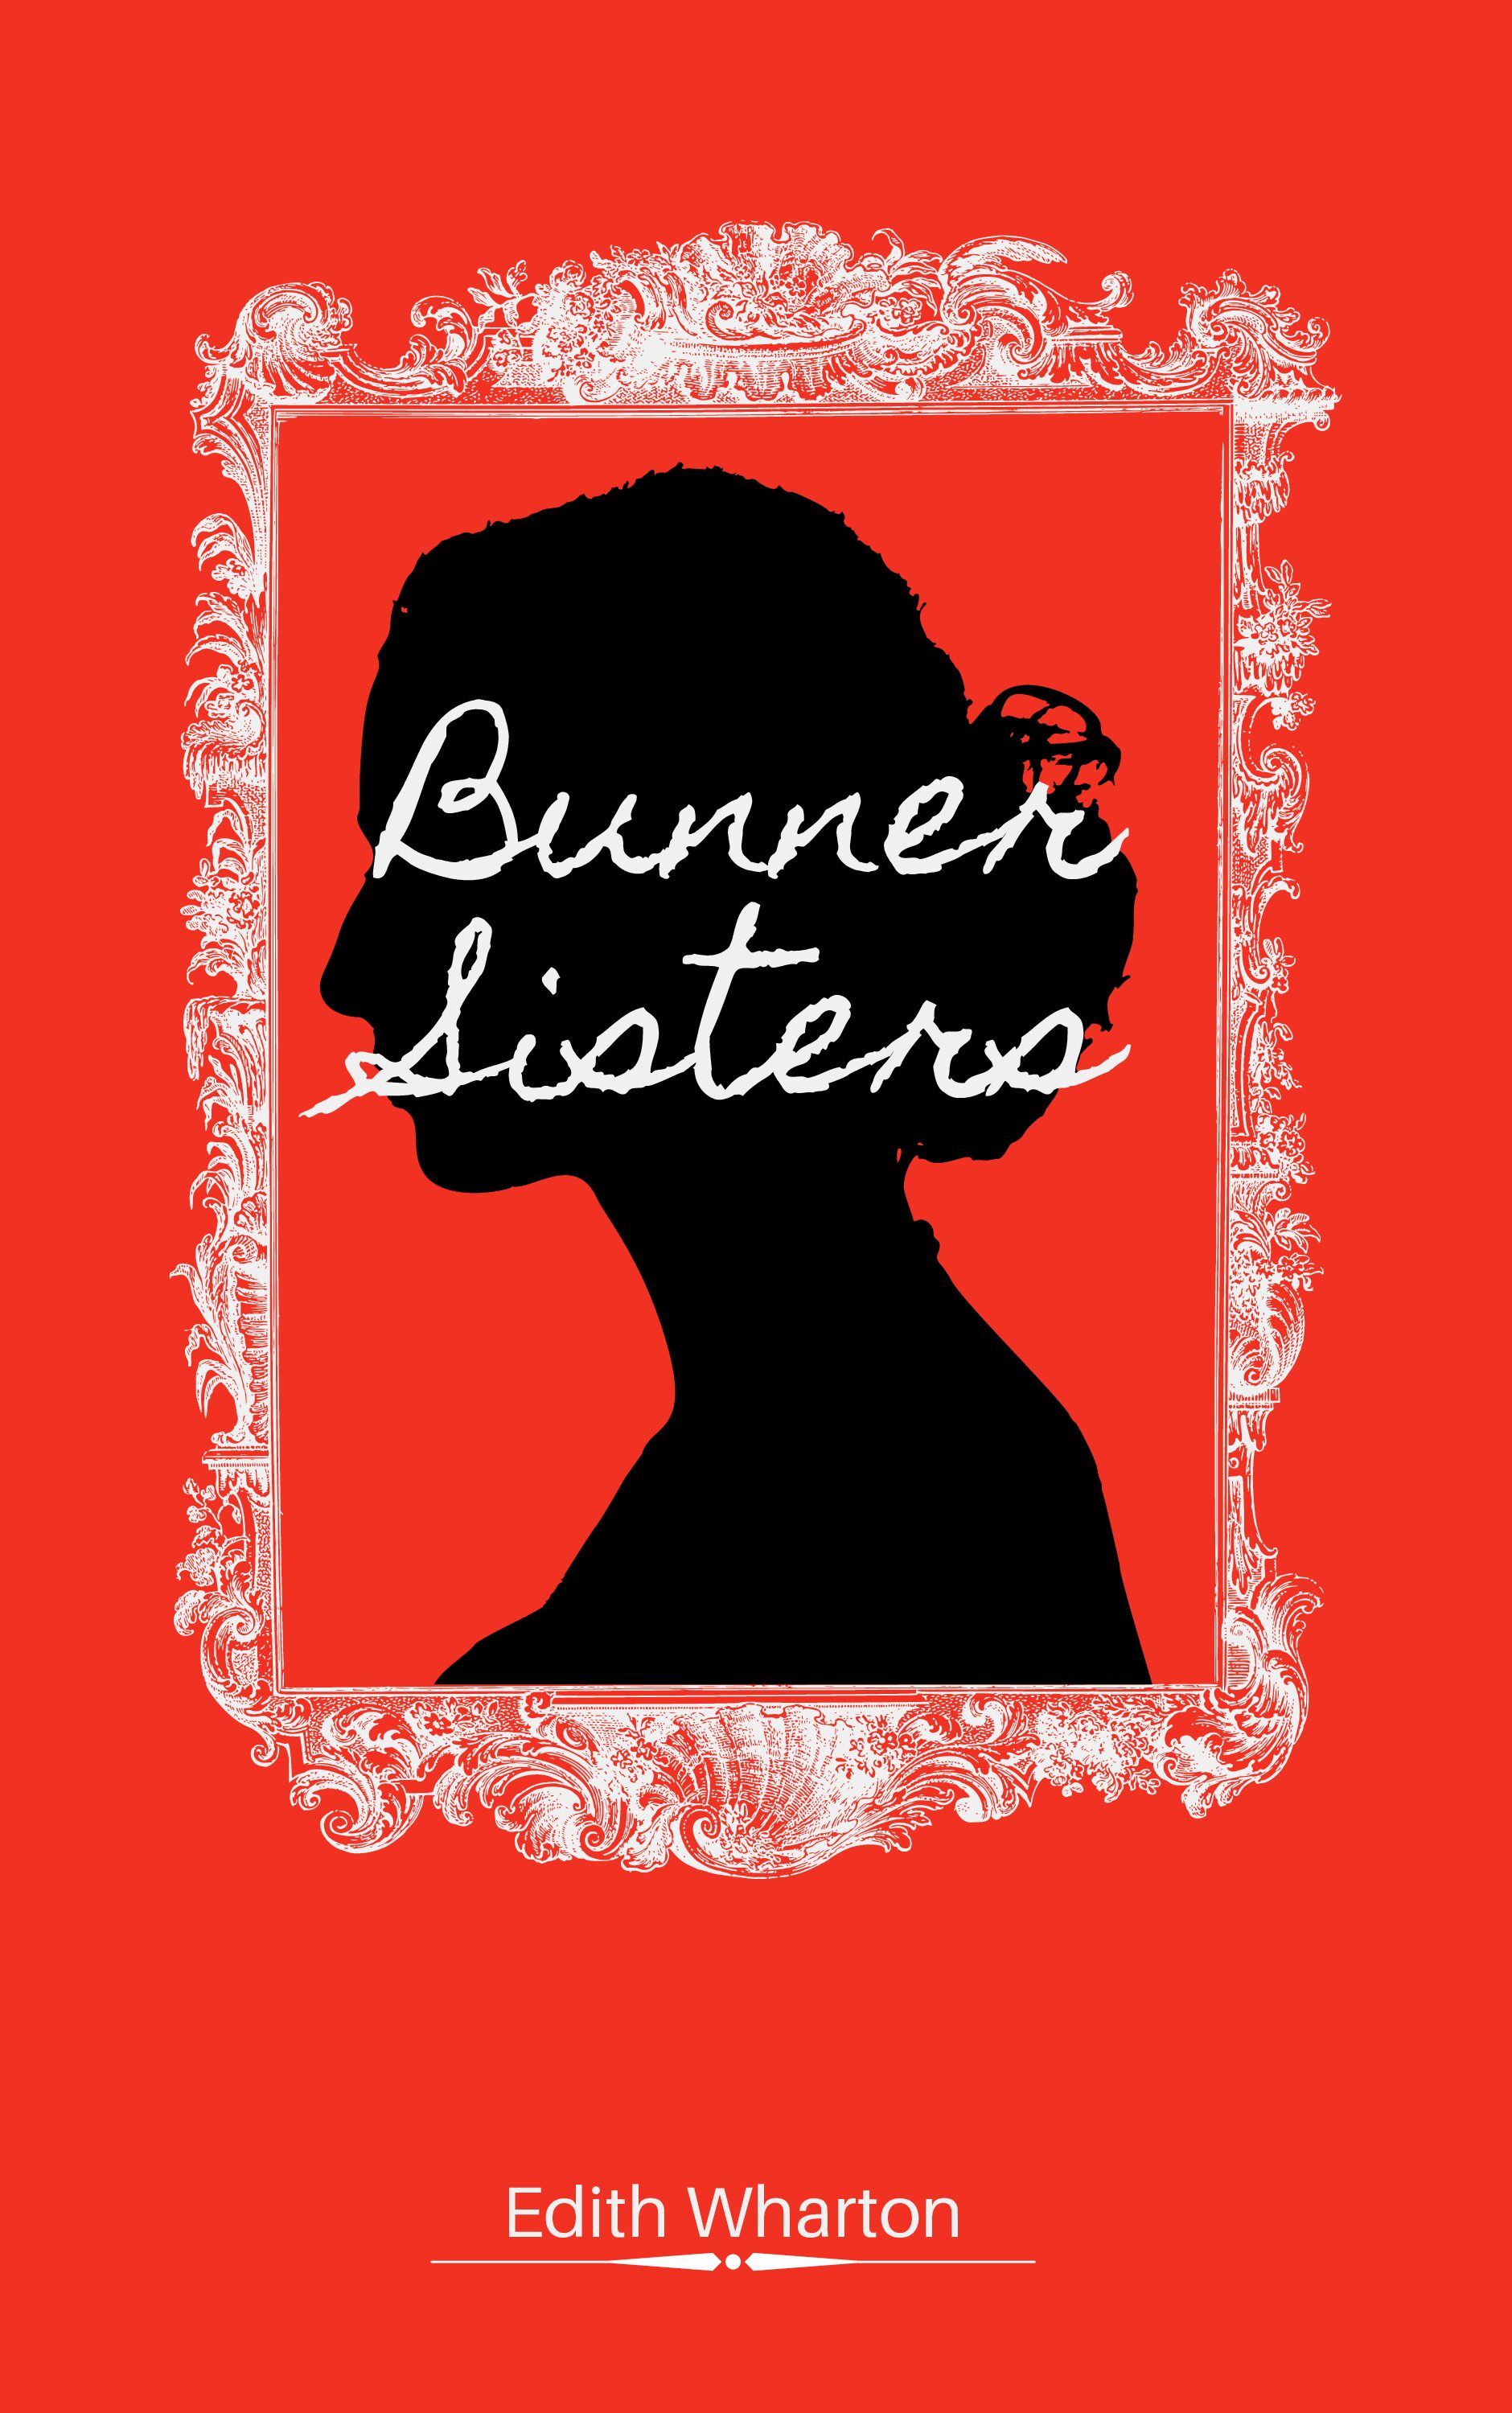 Book Cover: Bunner Sisters